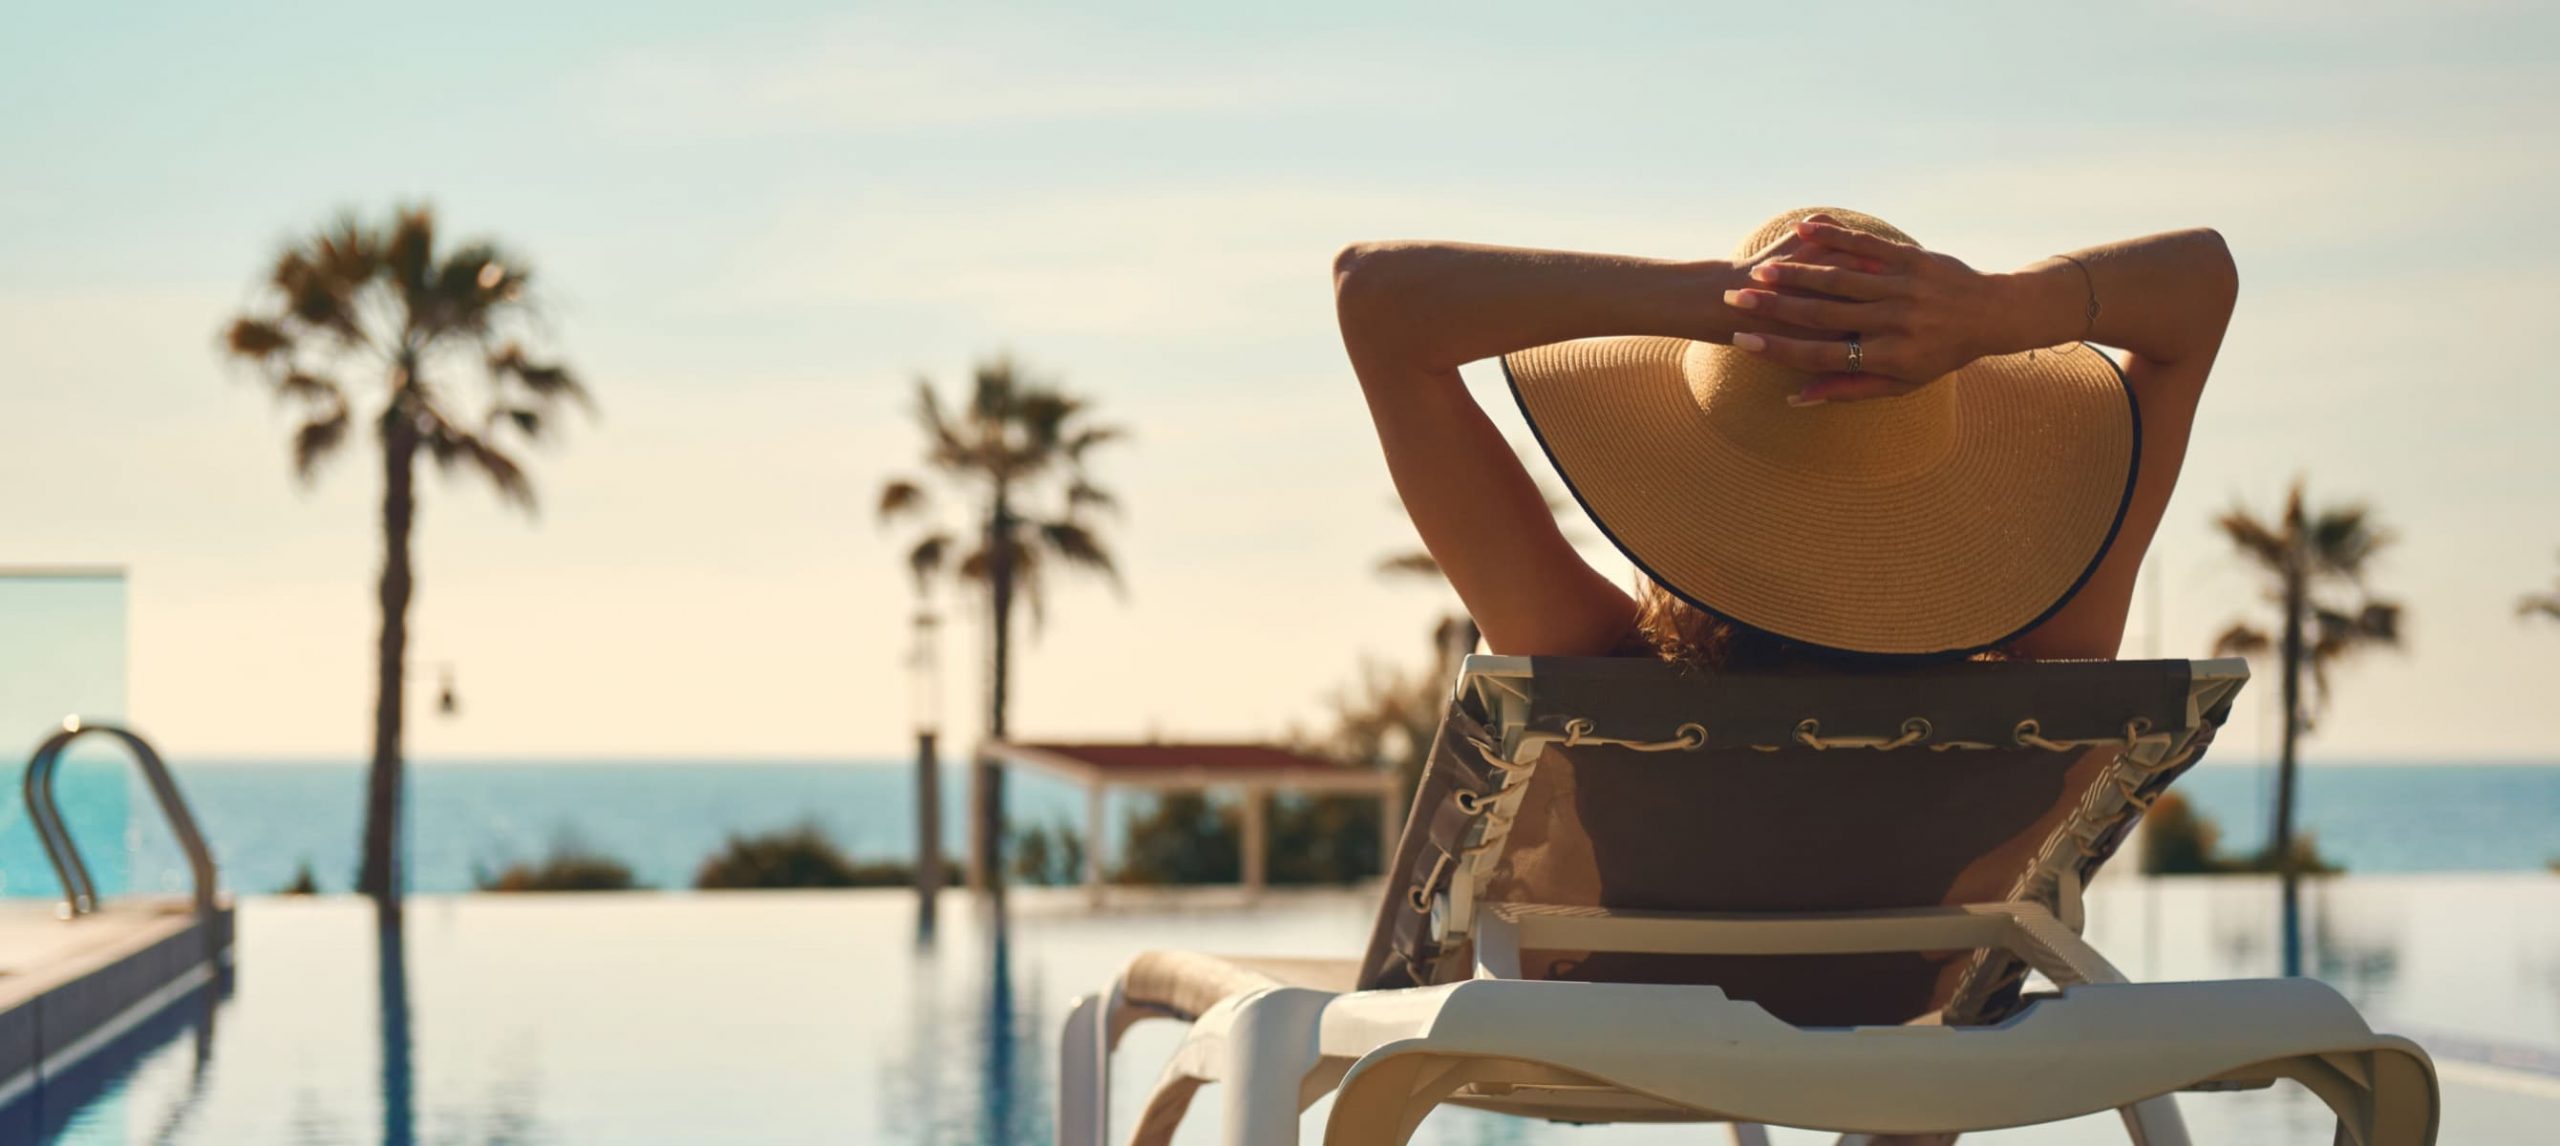 A woman lounging by an inifite swimming pool at a beach resort.